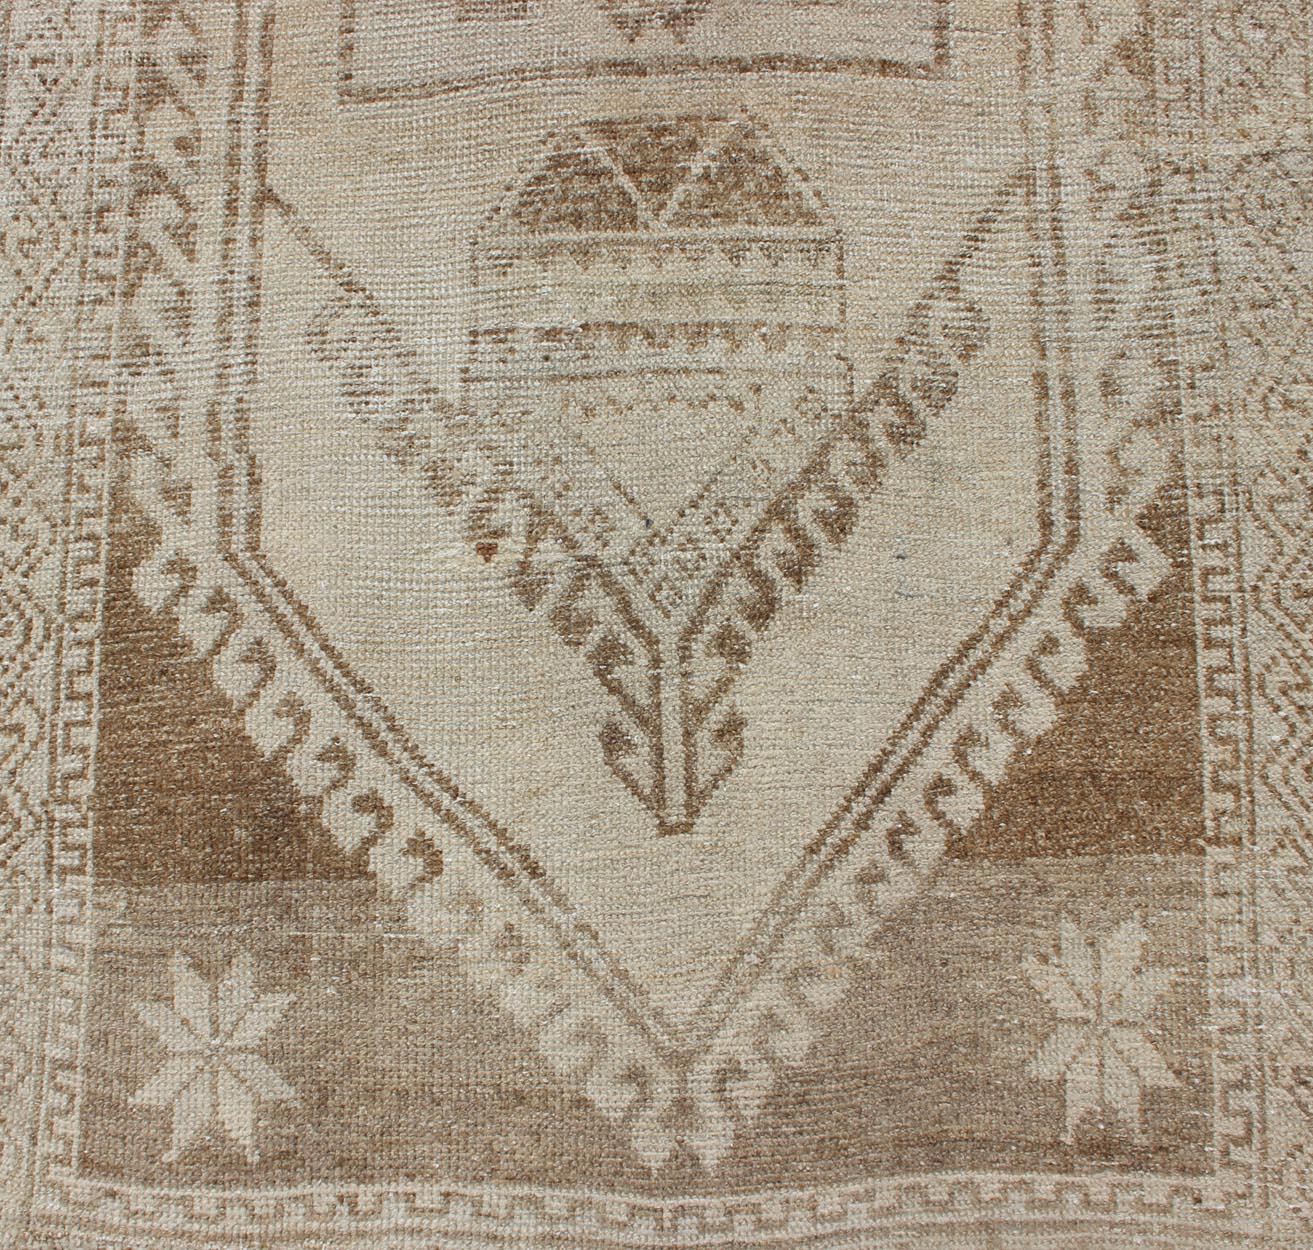 Vintage Turkish Oushak Runner with Floral Medallions in Taupe and Sandy Color For Sale 1